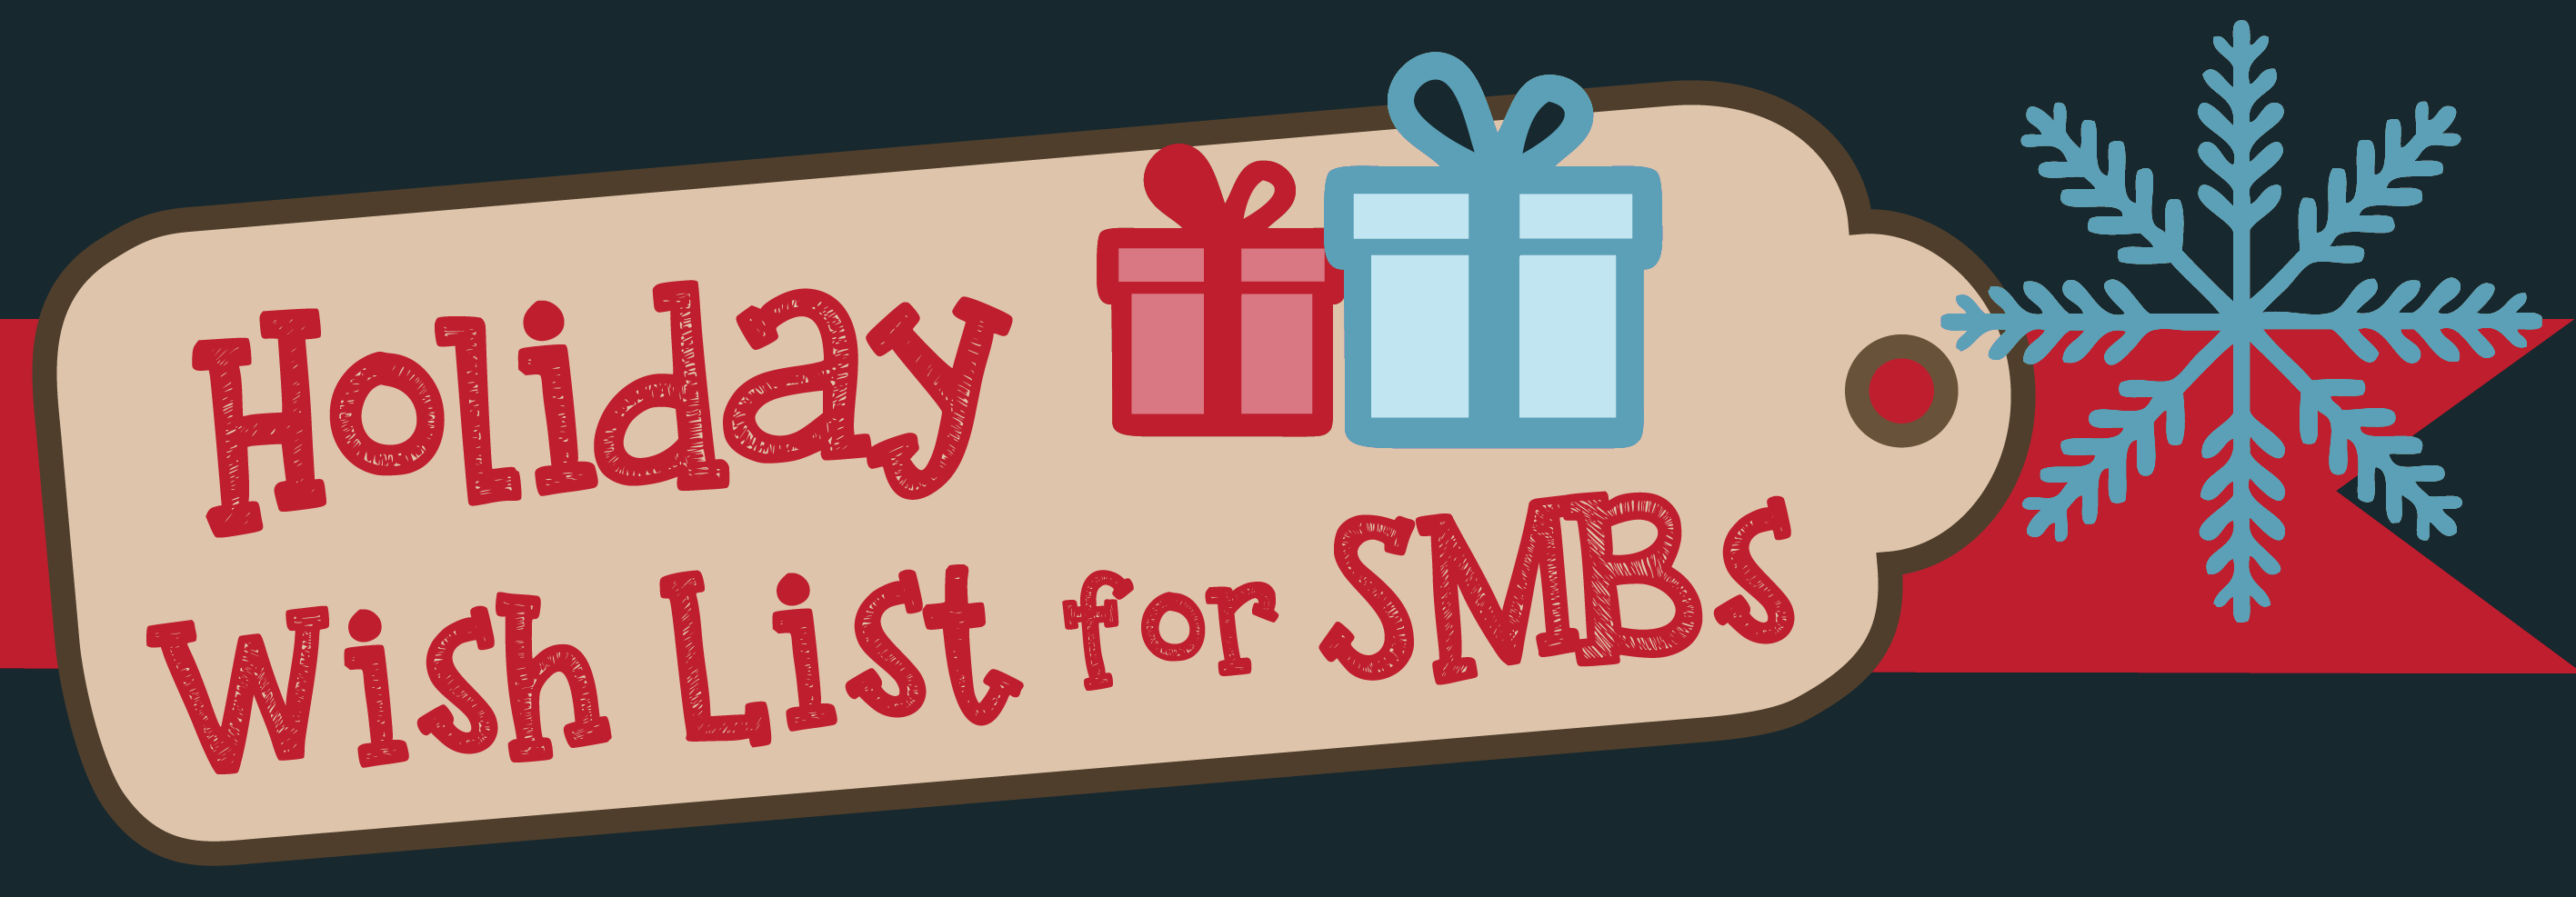 Smbs 2017 Holiday Wish List Lcm 20 Header For Blog 01